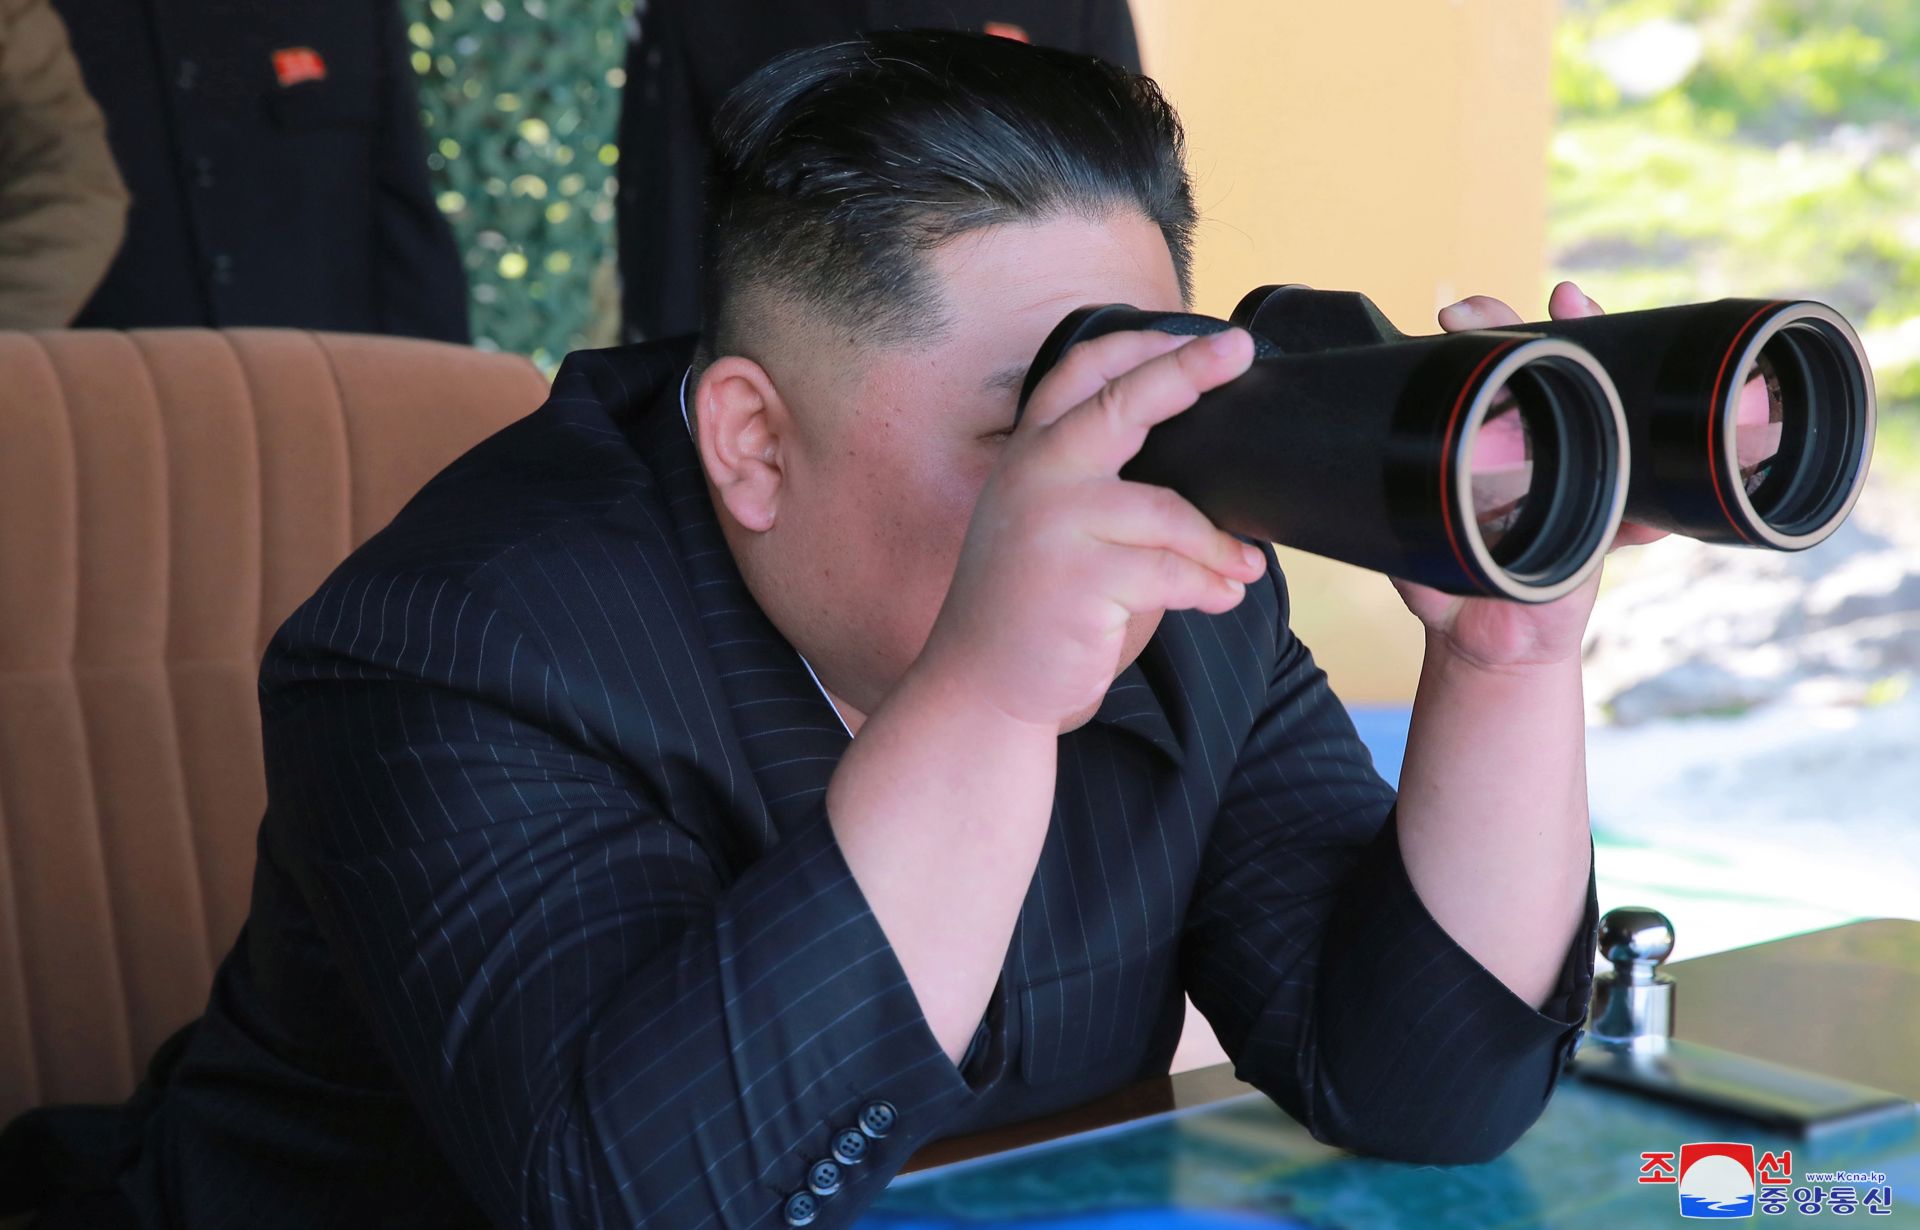 epa07559738 A photo released by the official North Korean Central News Agency (KCNA) shows Kim Jong Un, leader of the Democratic People's Republic of Korea reacts while overseeing the strike drill of military units at an undisclosed location in North Korea, 09 May 2019 (issued 10 May 2019).  EPA/KCNA   EDITORIAL USE ONLY